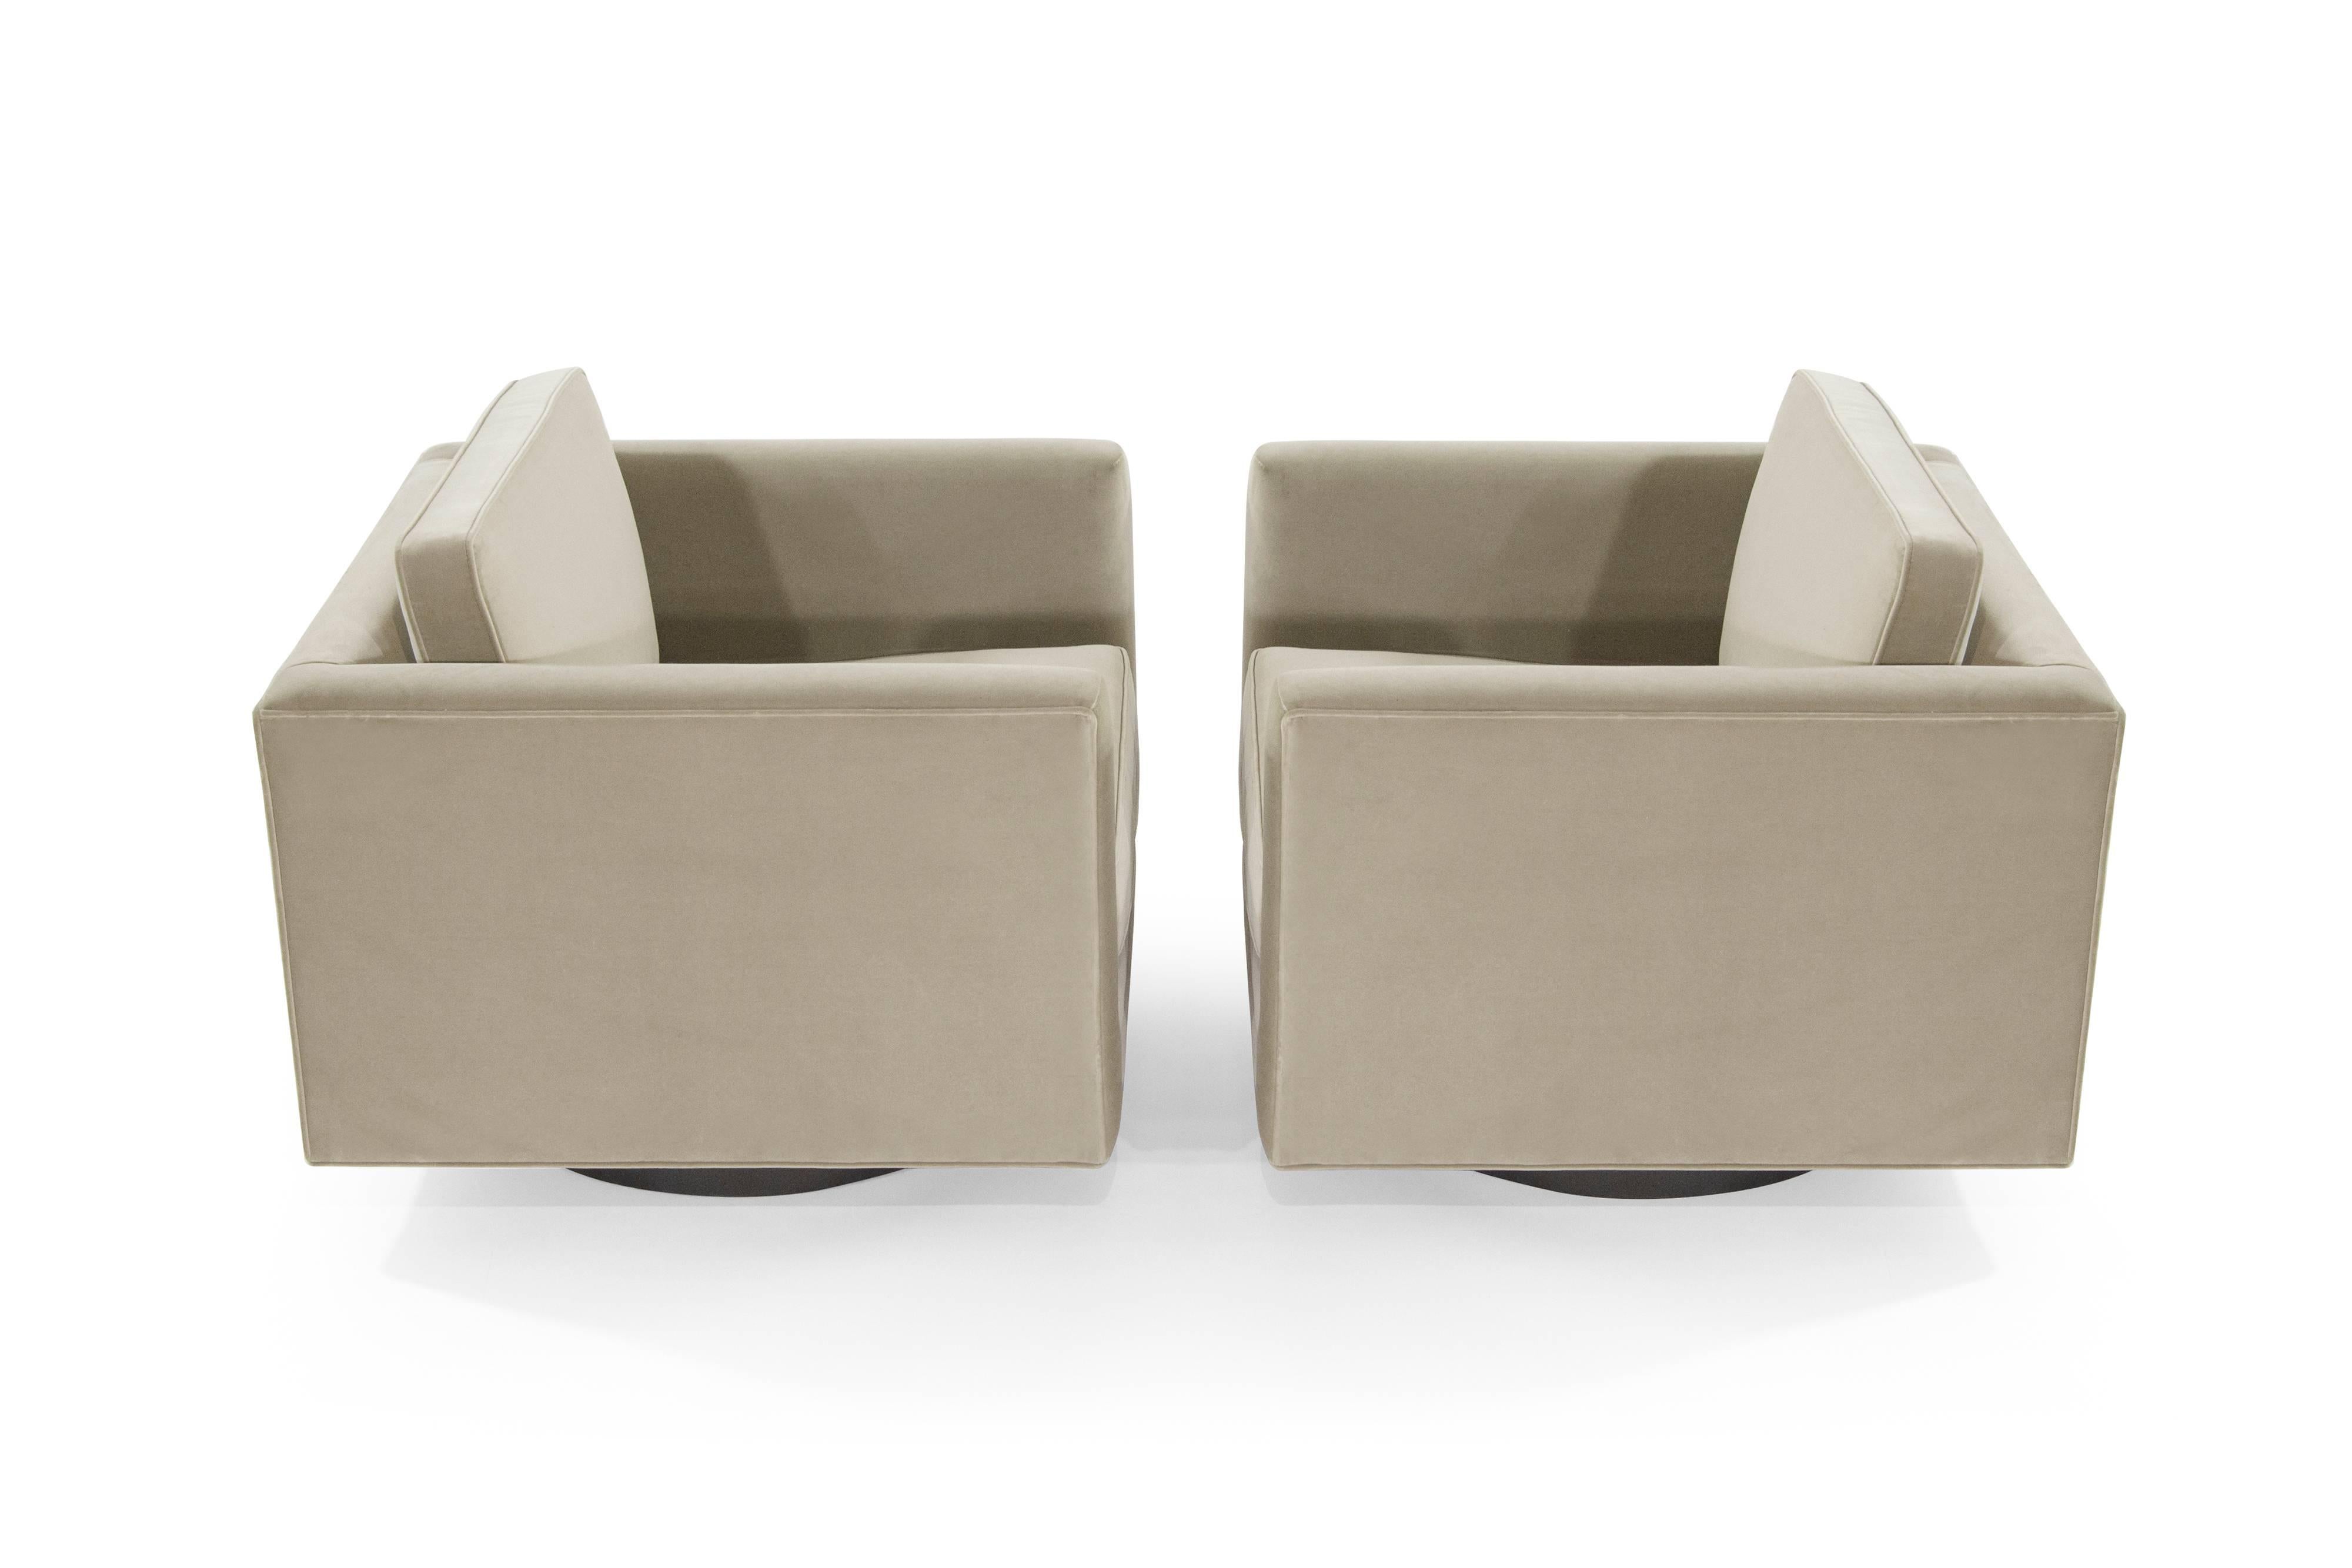 20th Century Cube Swivel Chairs by Harvey Probber, Model no. 1461